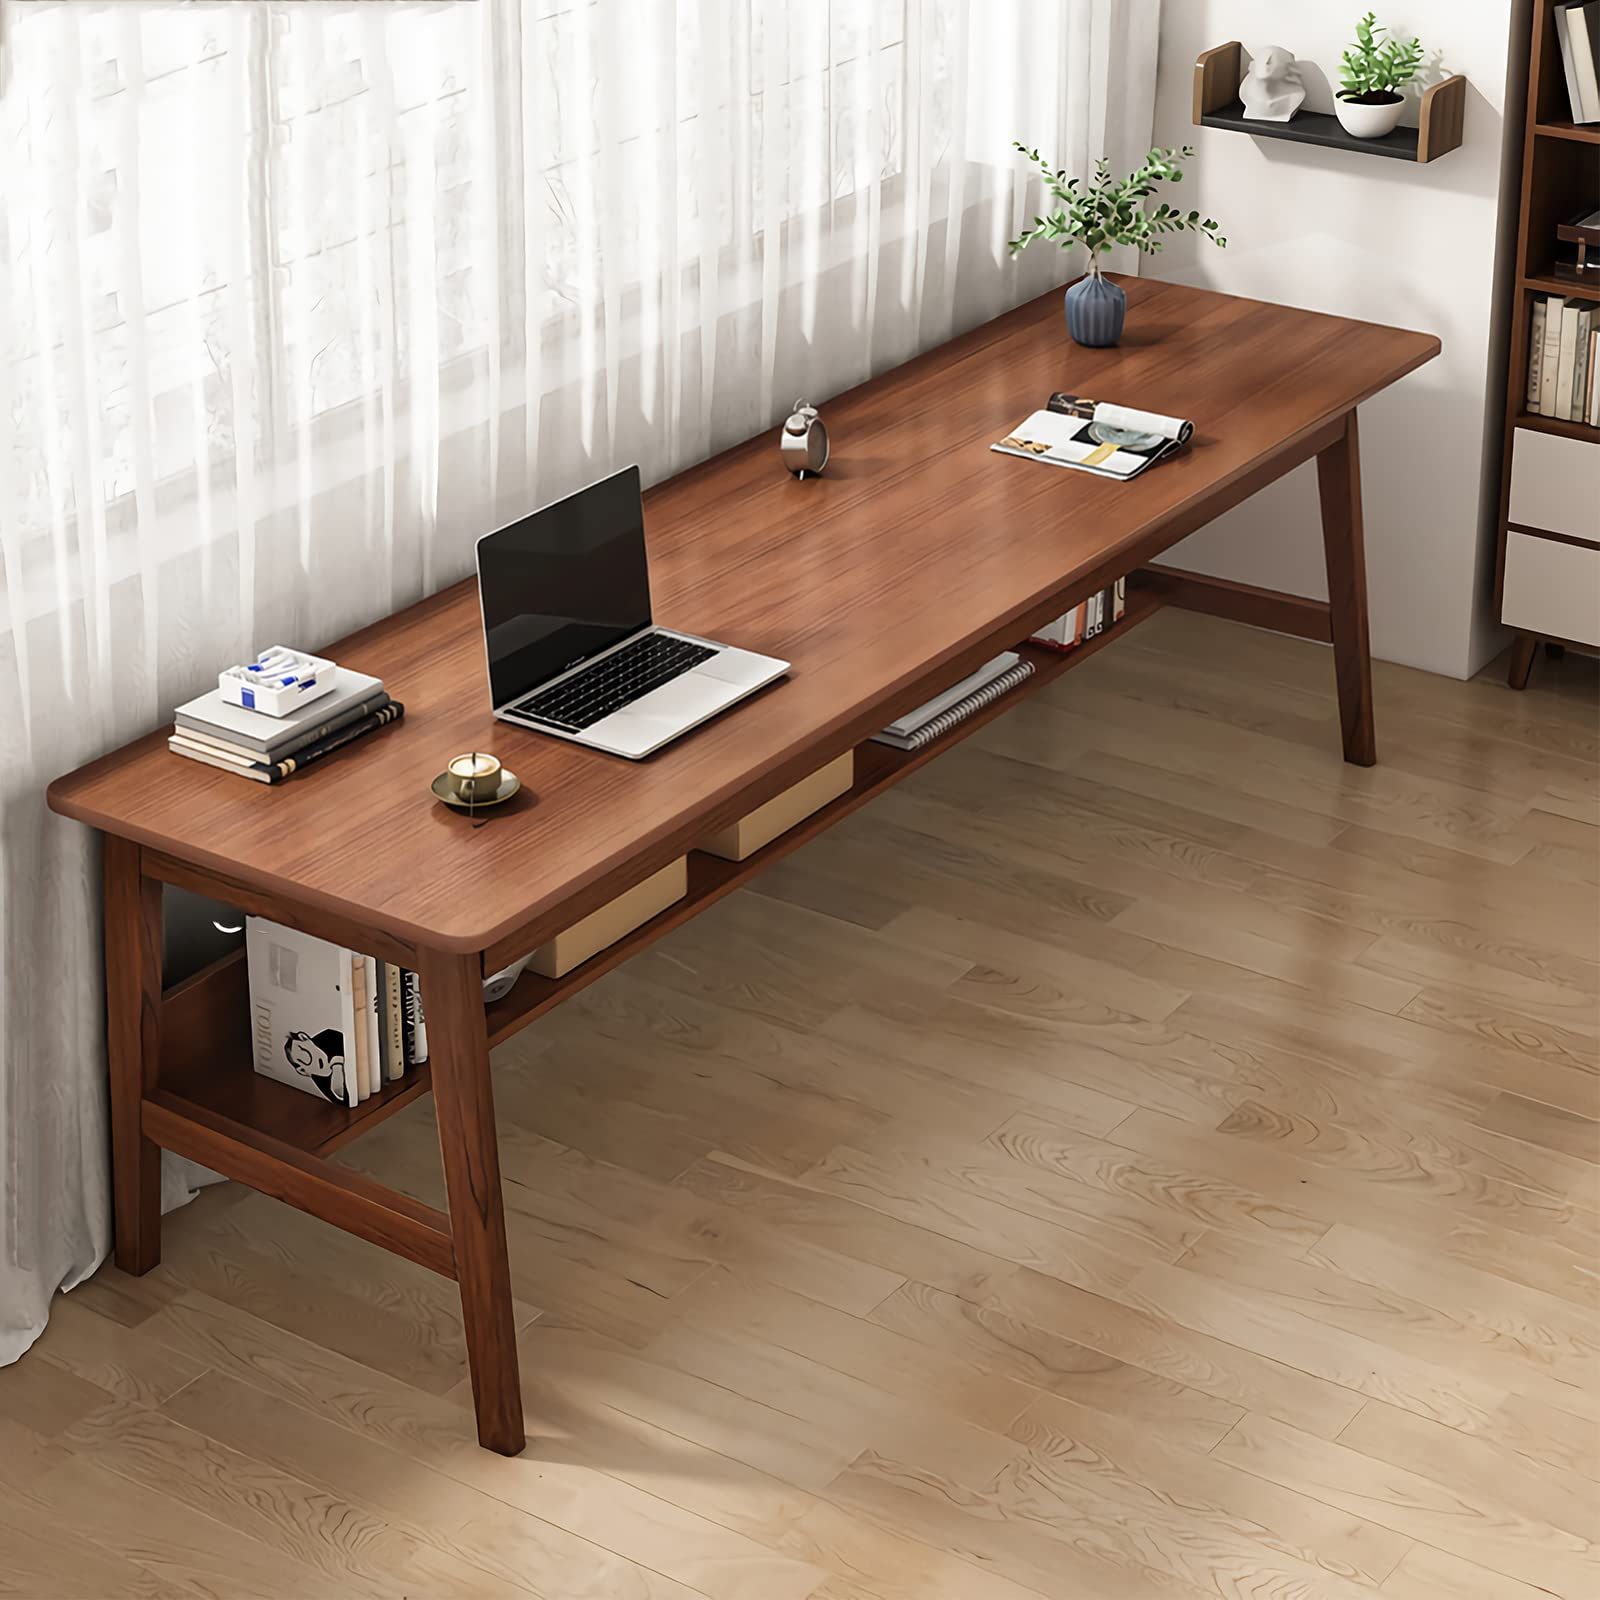 The Beauty of a Solid Wood Desk for Your Home Office